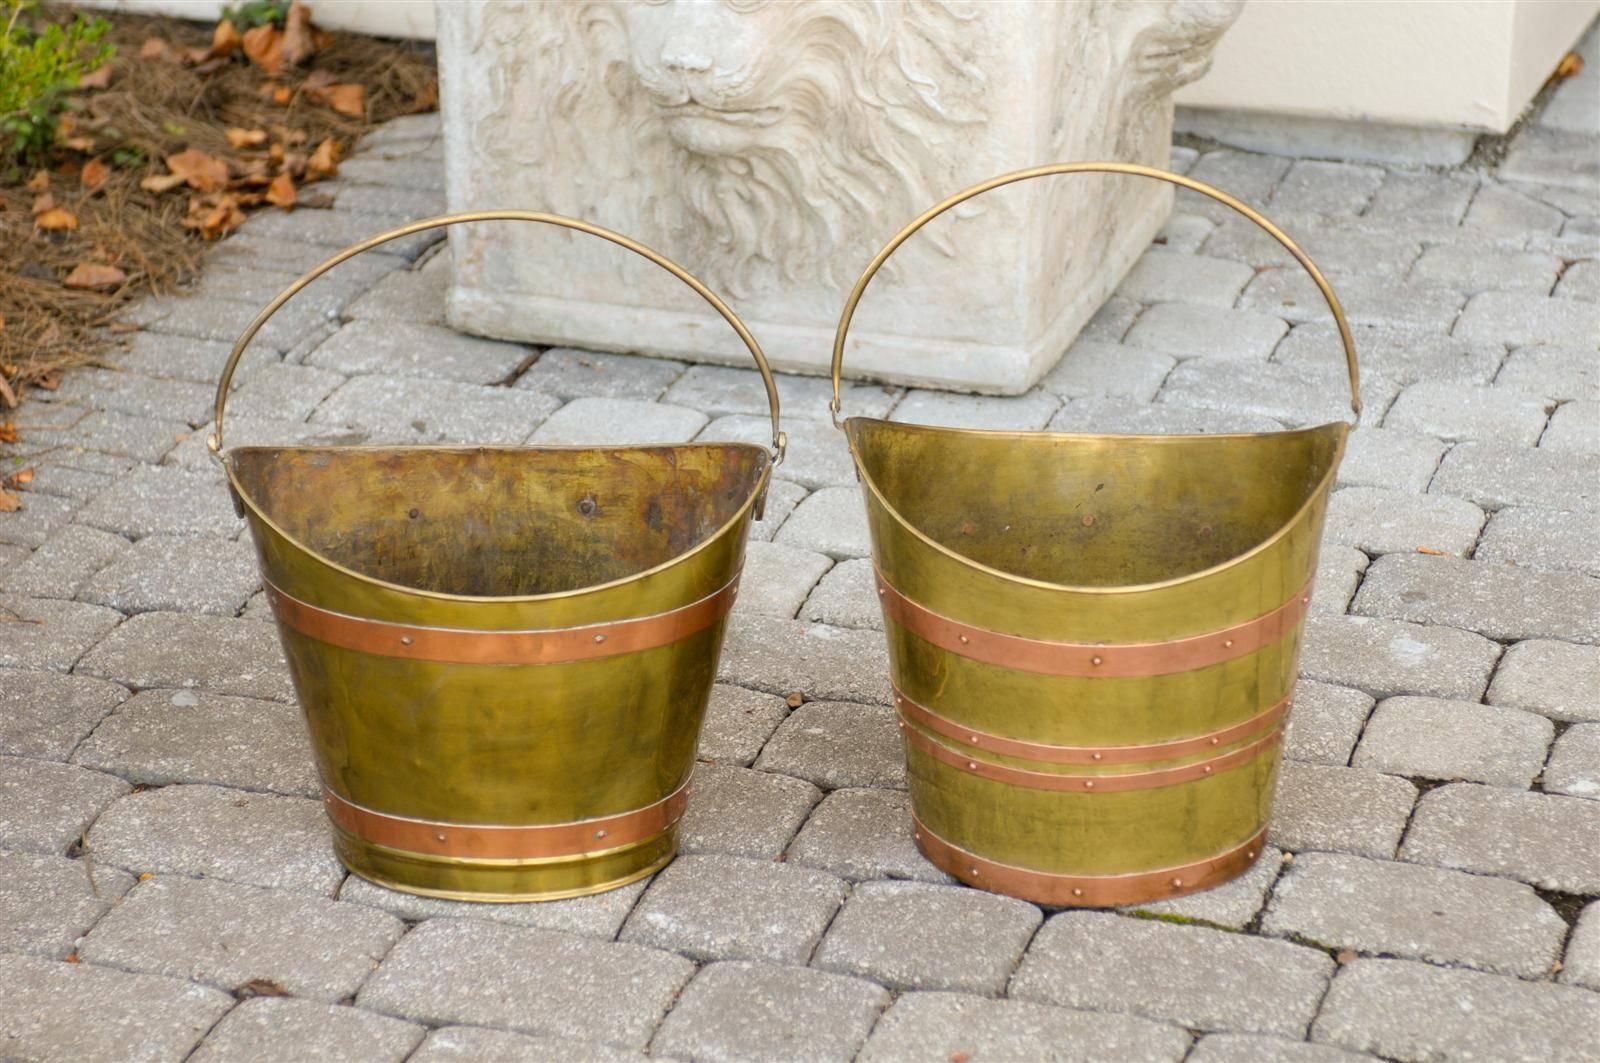 English Wide Mouth Brass Bucket with Copper Straps from the Early 20th Century For Sale 1